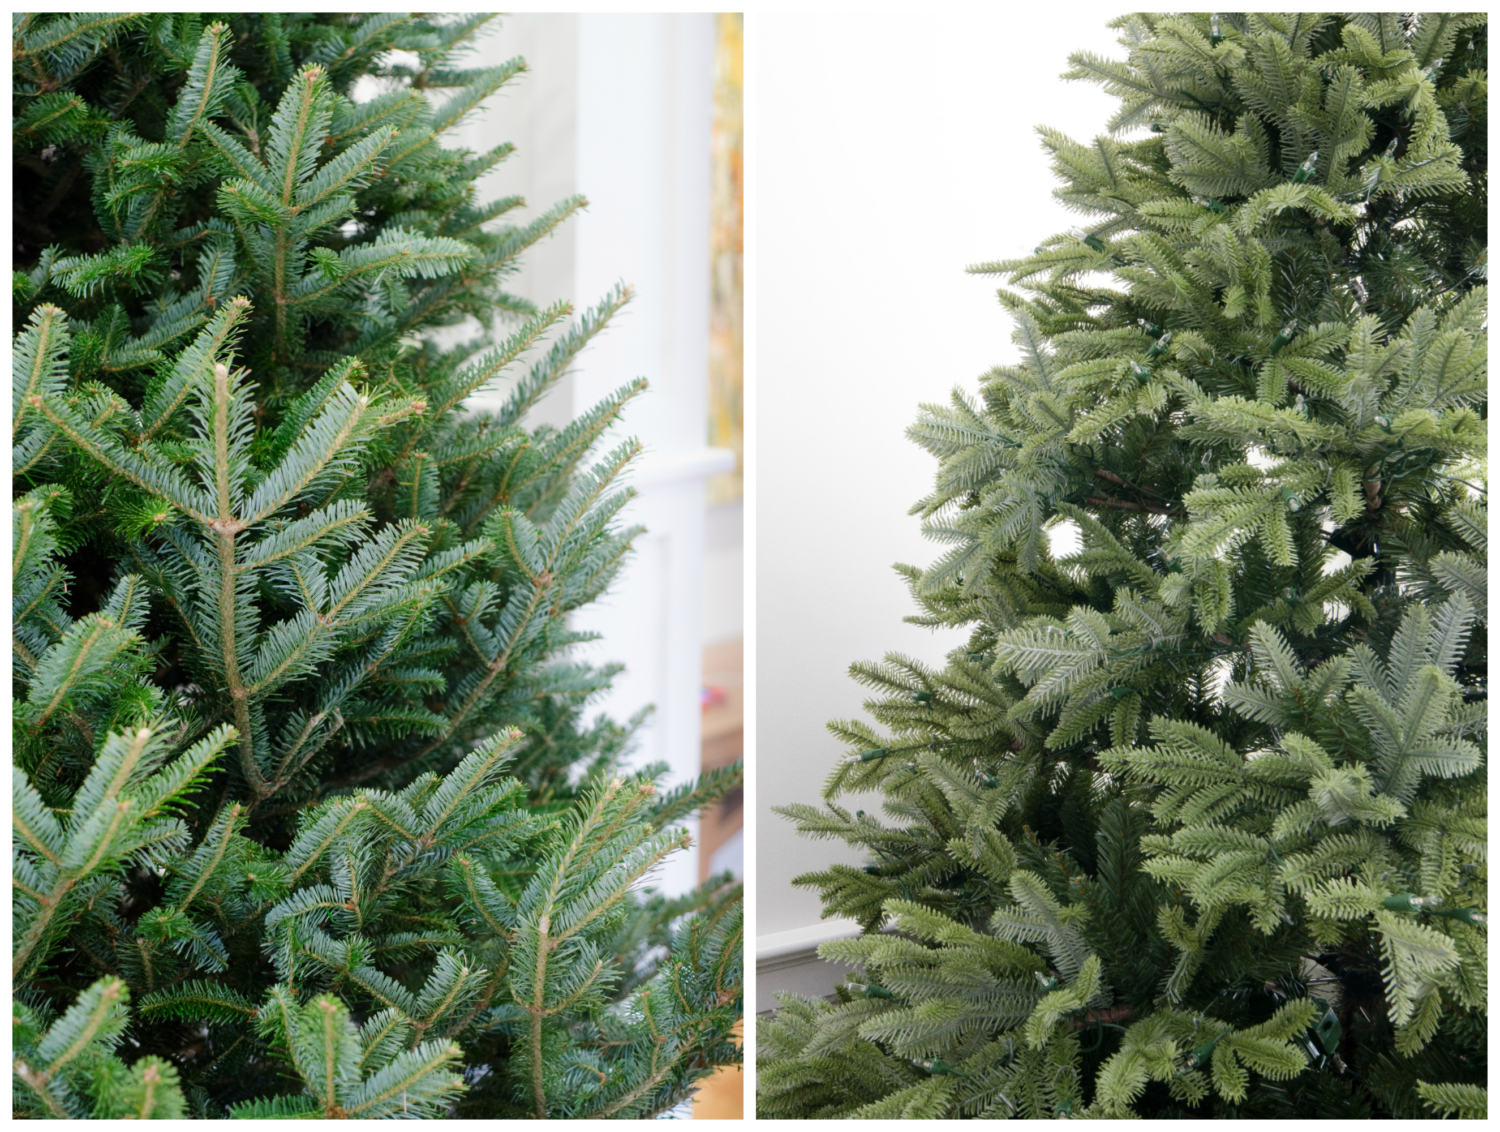 An honest side-by-side comparison of a real tree vs. a fake tree